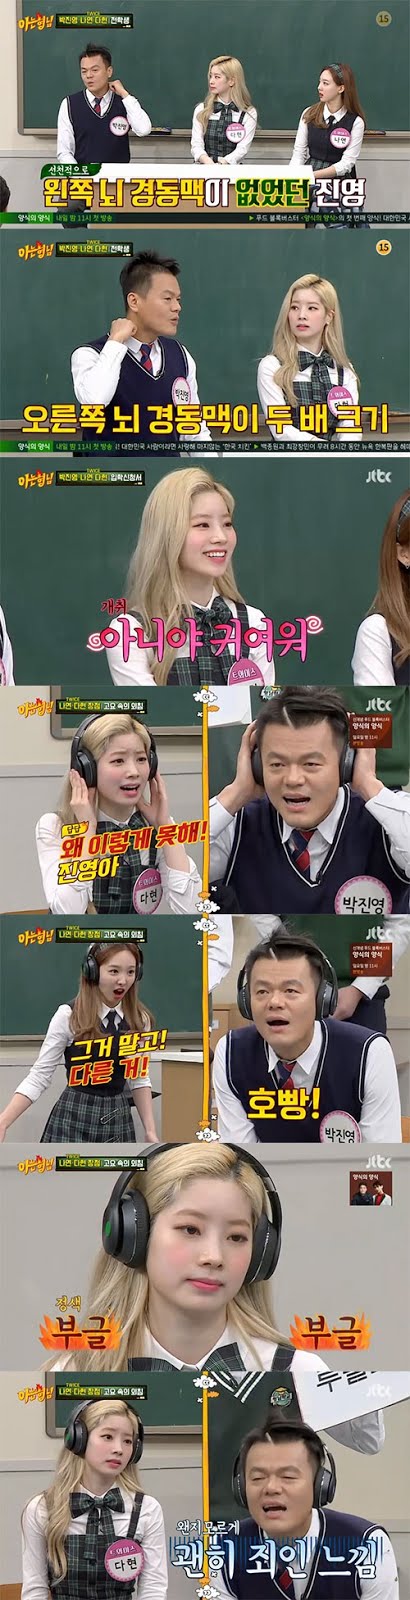 [Weekend Variety Roundup] Knowing Bros (JYP + TWICE), Running Man, Master in the House (Lee Young Ae)